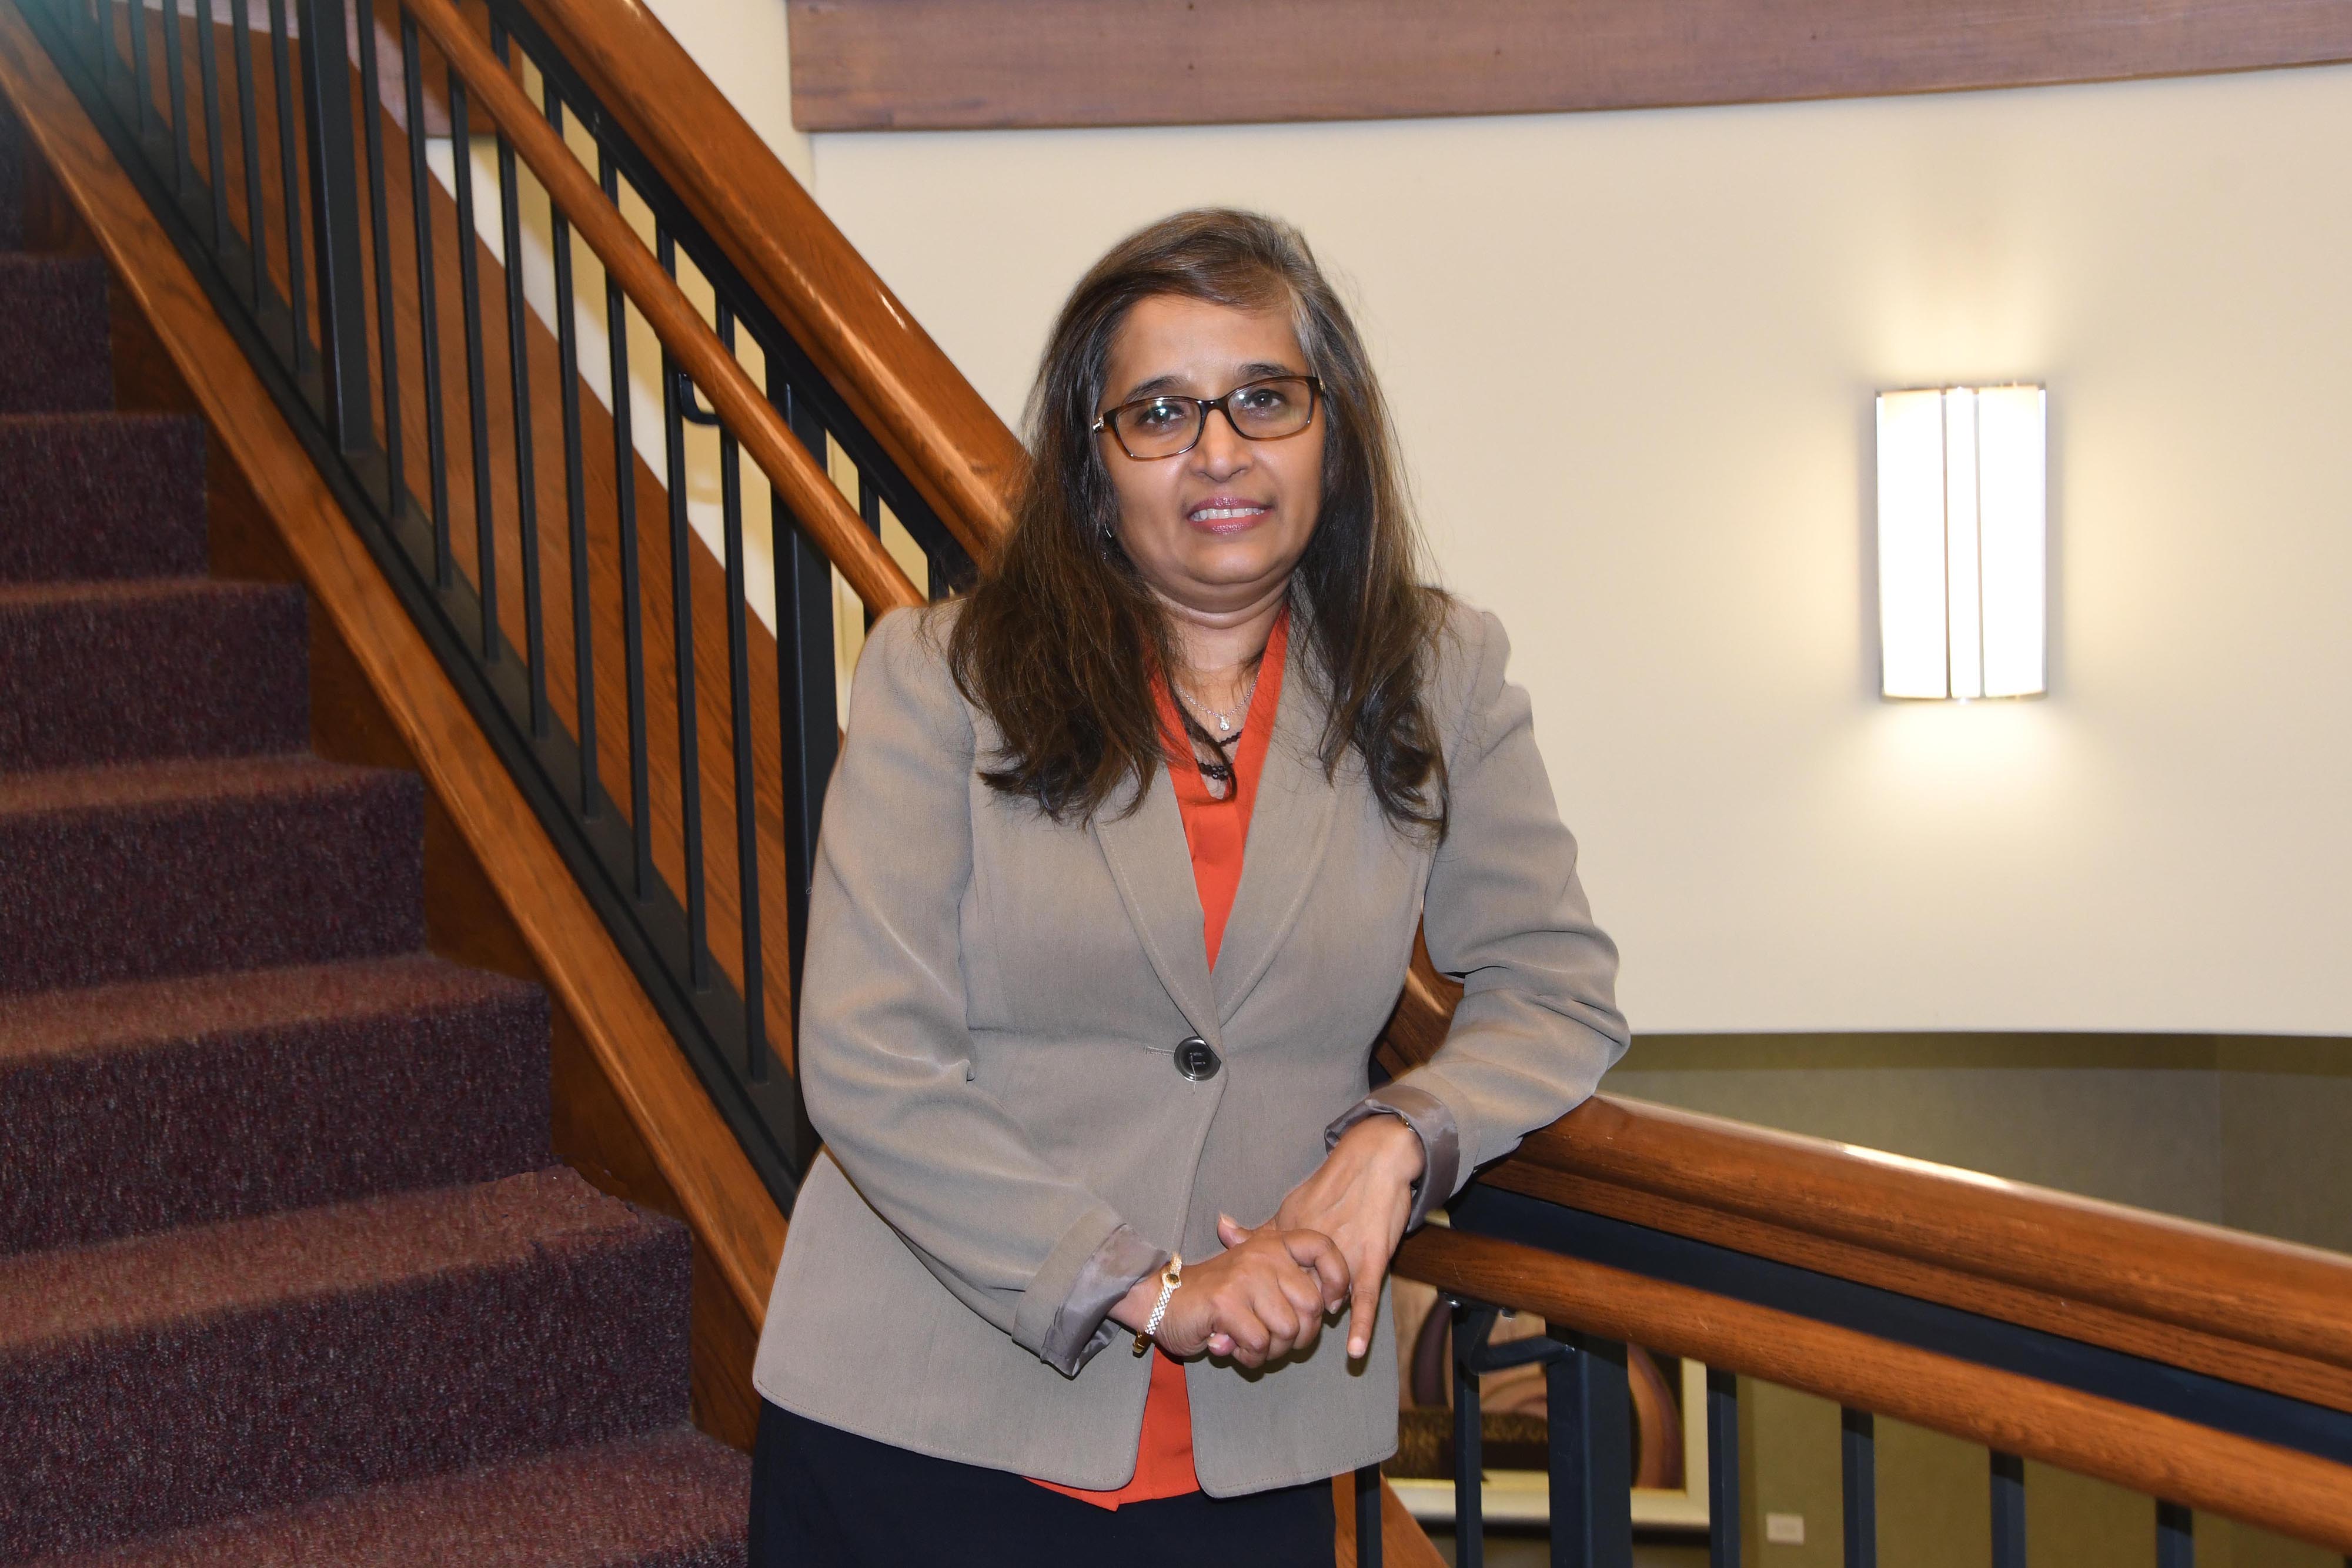 Dr. Nandita Das has been named as an honoree of Investment News' Diversity and Inclusion Lifetime Award.